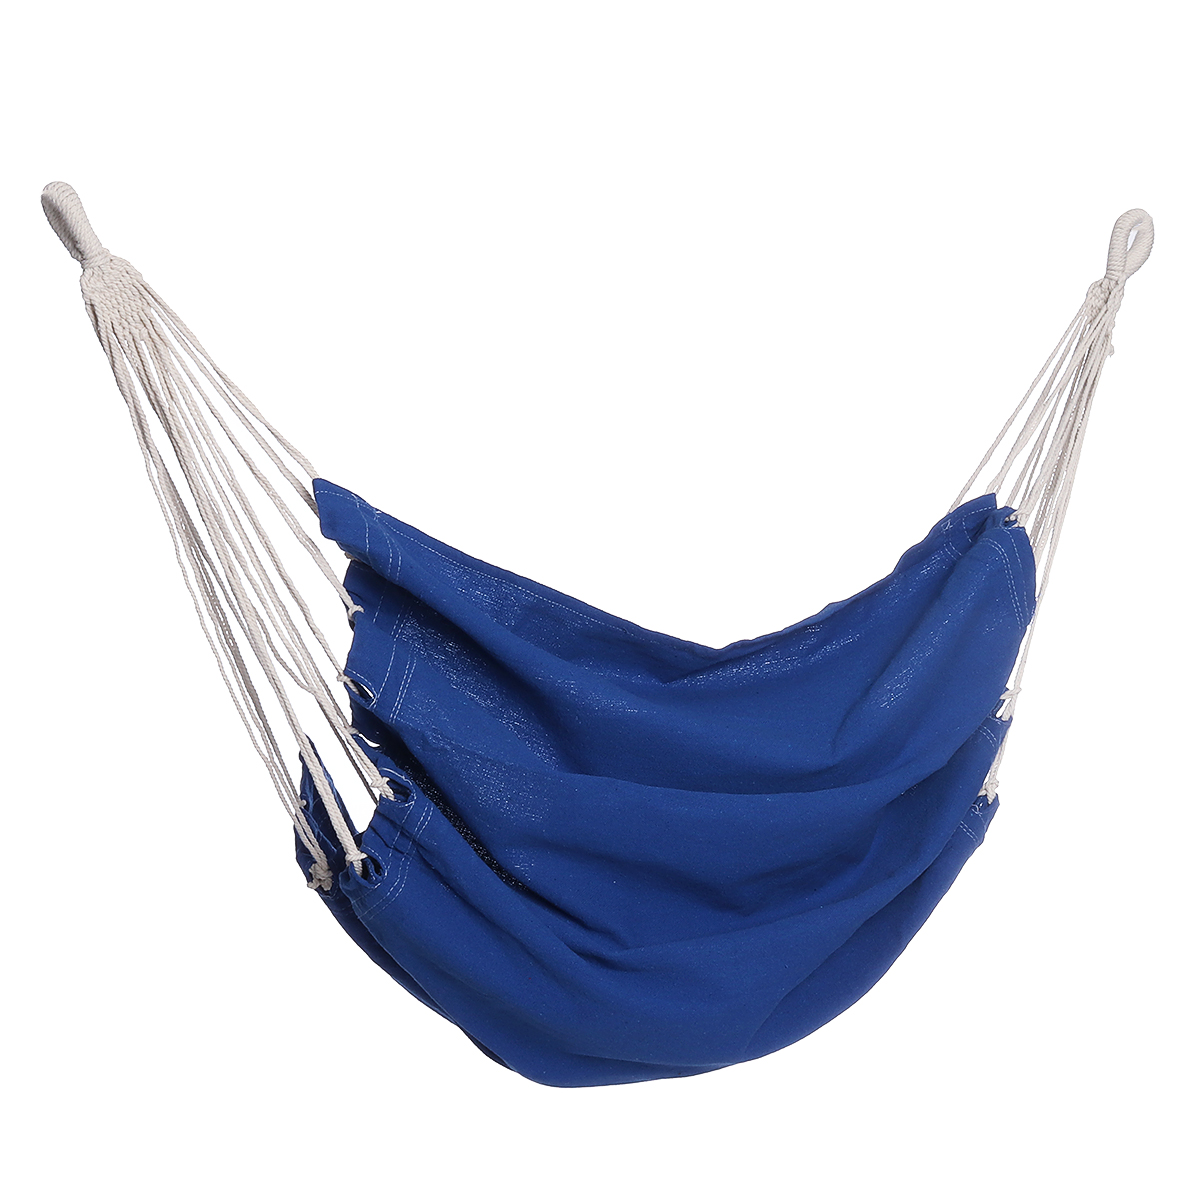 Camping-Hammock-Chair-Swing-Seat-Indoor-Outdoor-Folding-Hanging-Chair-with-Ropes-Pillow-1711690-5